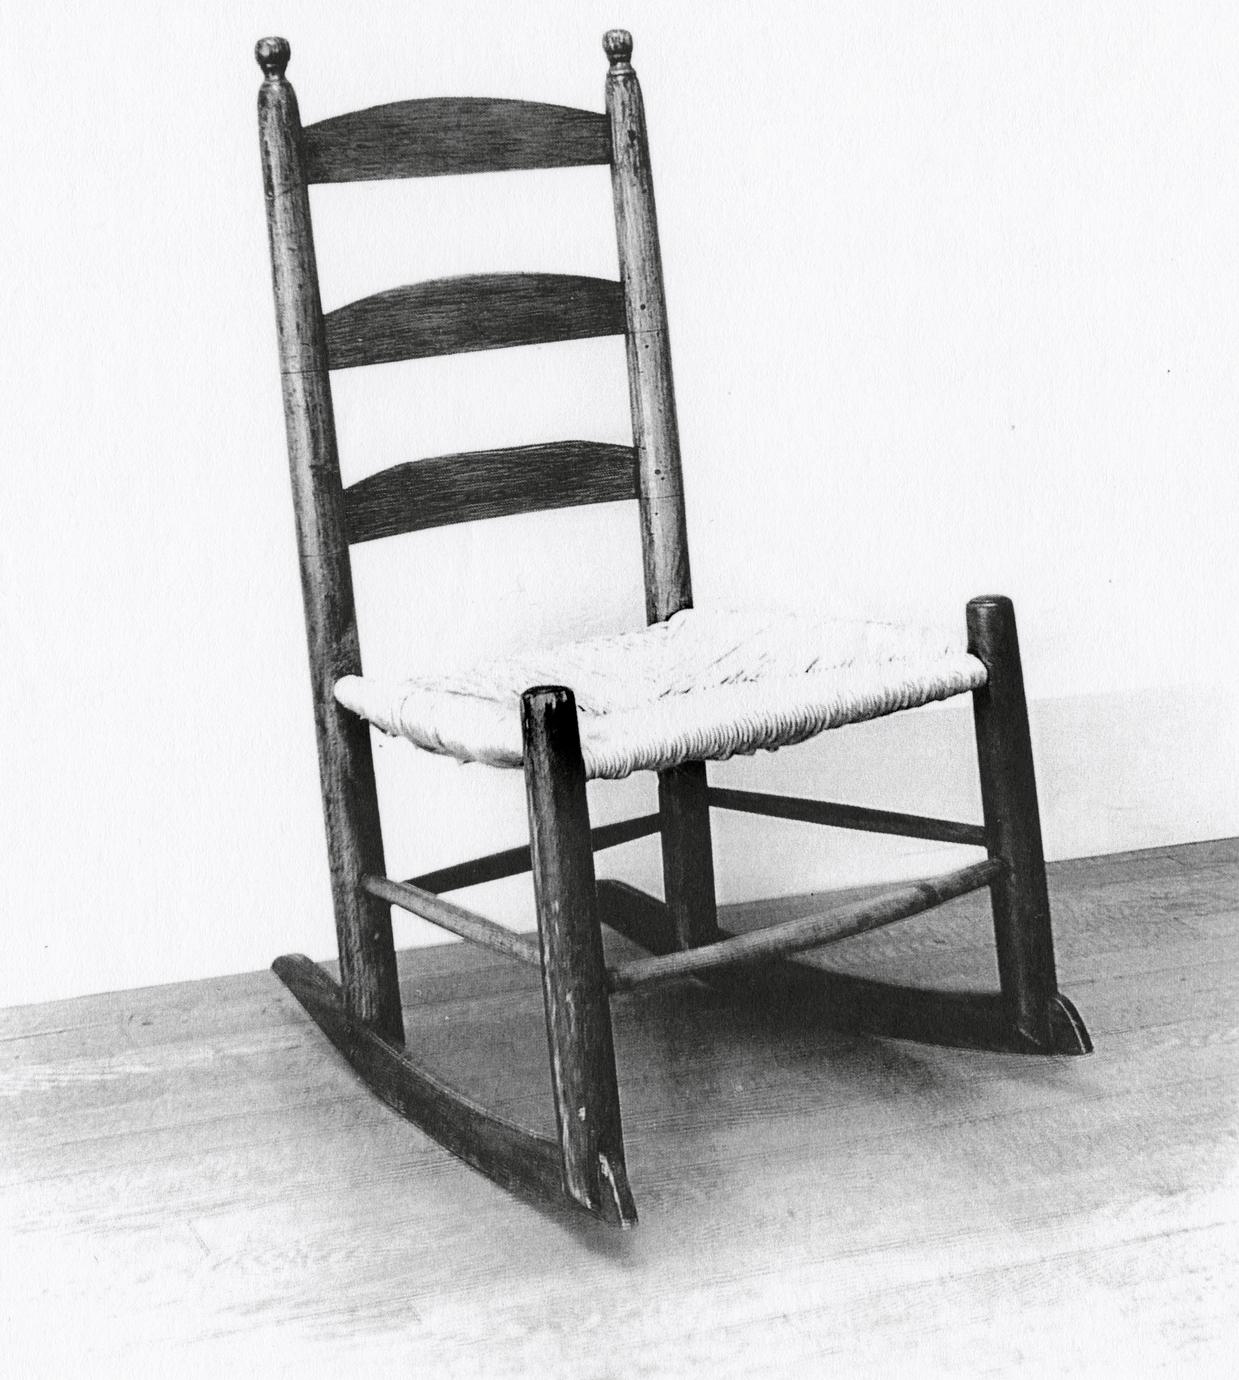 Black and white photograph of a slat-back chair with rockers.